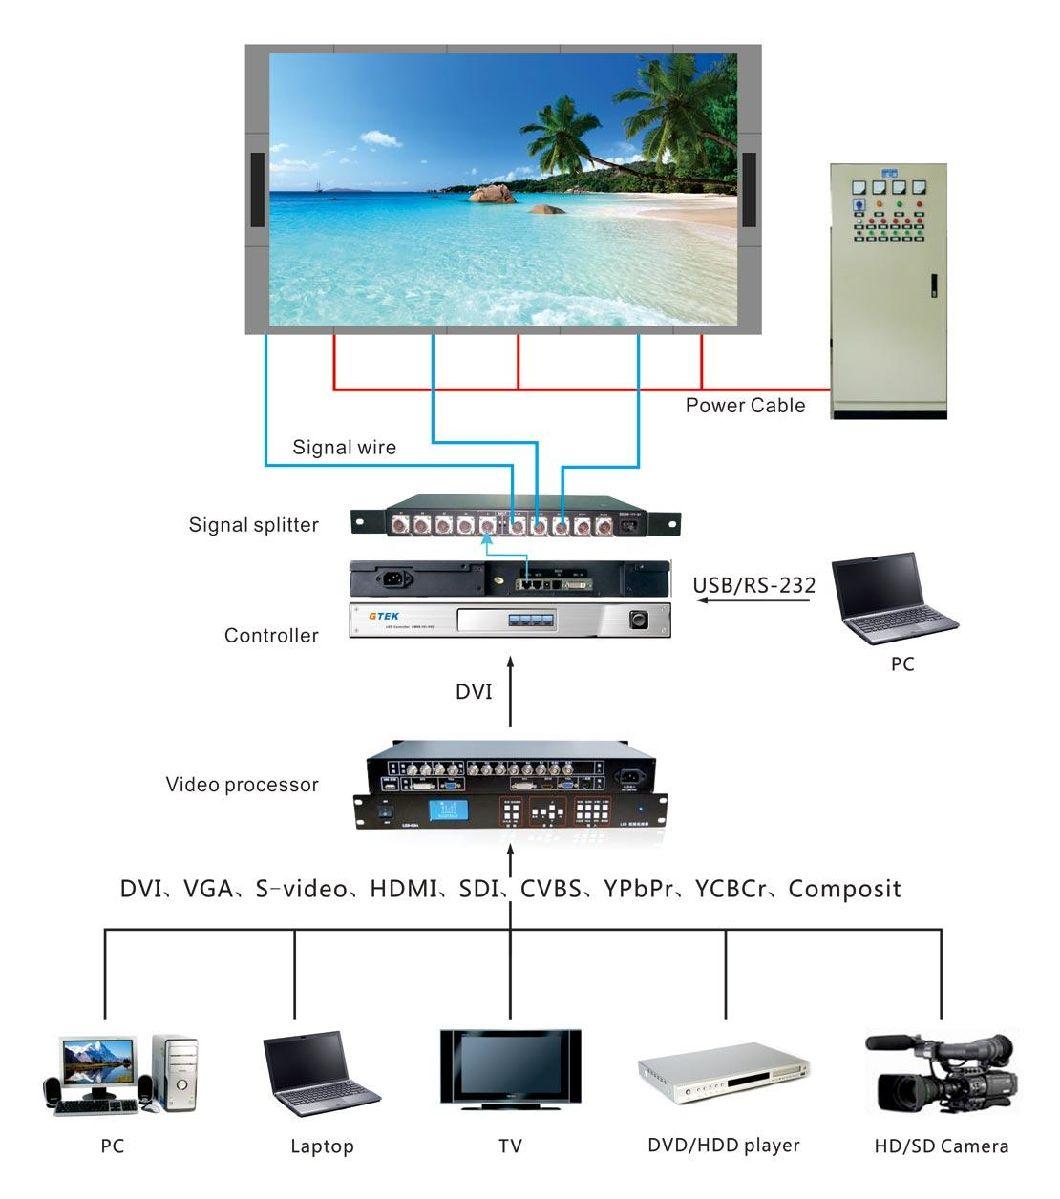 Outdoor P8 Weather Proof Electronic Display Board LED TV Screen Panel Factory